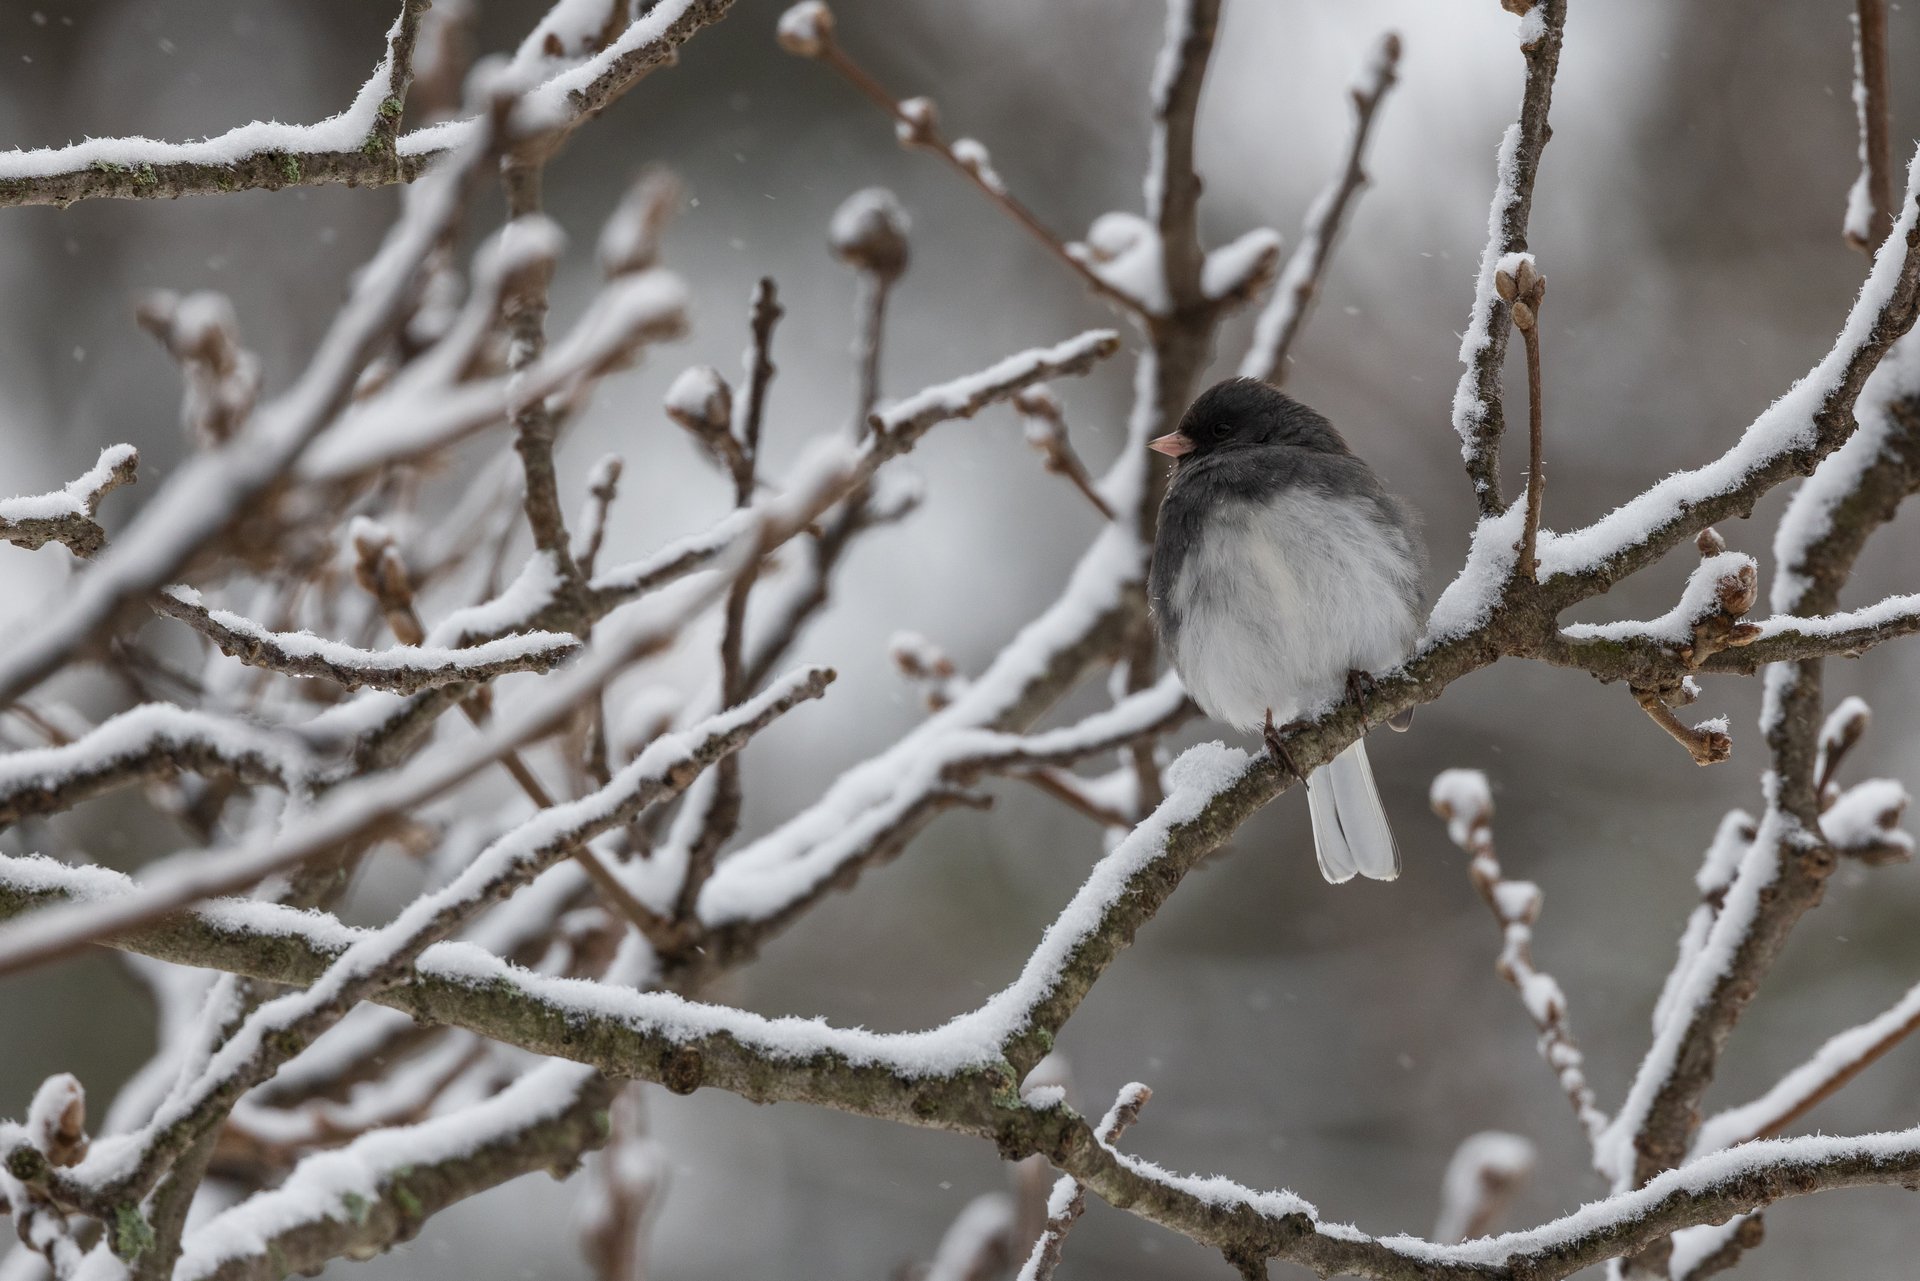 Grey and white bird sitting among snow covered branches